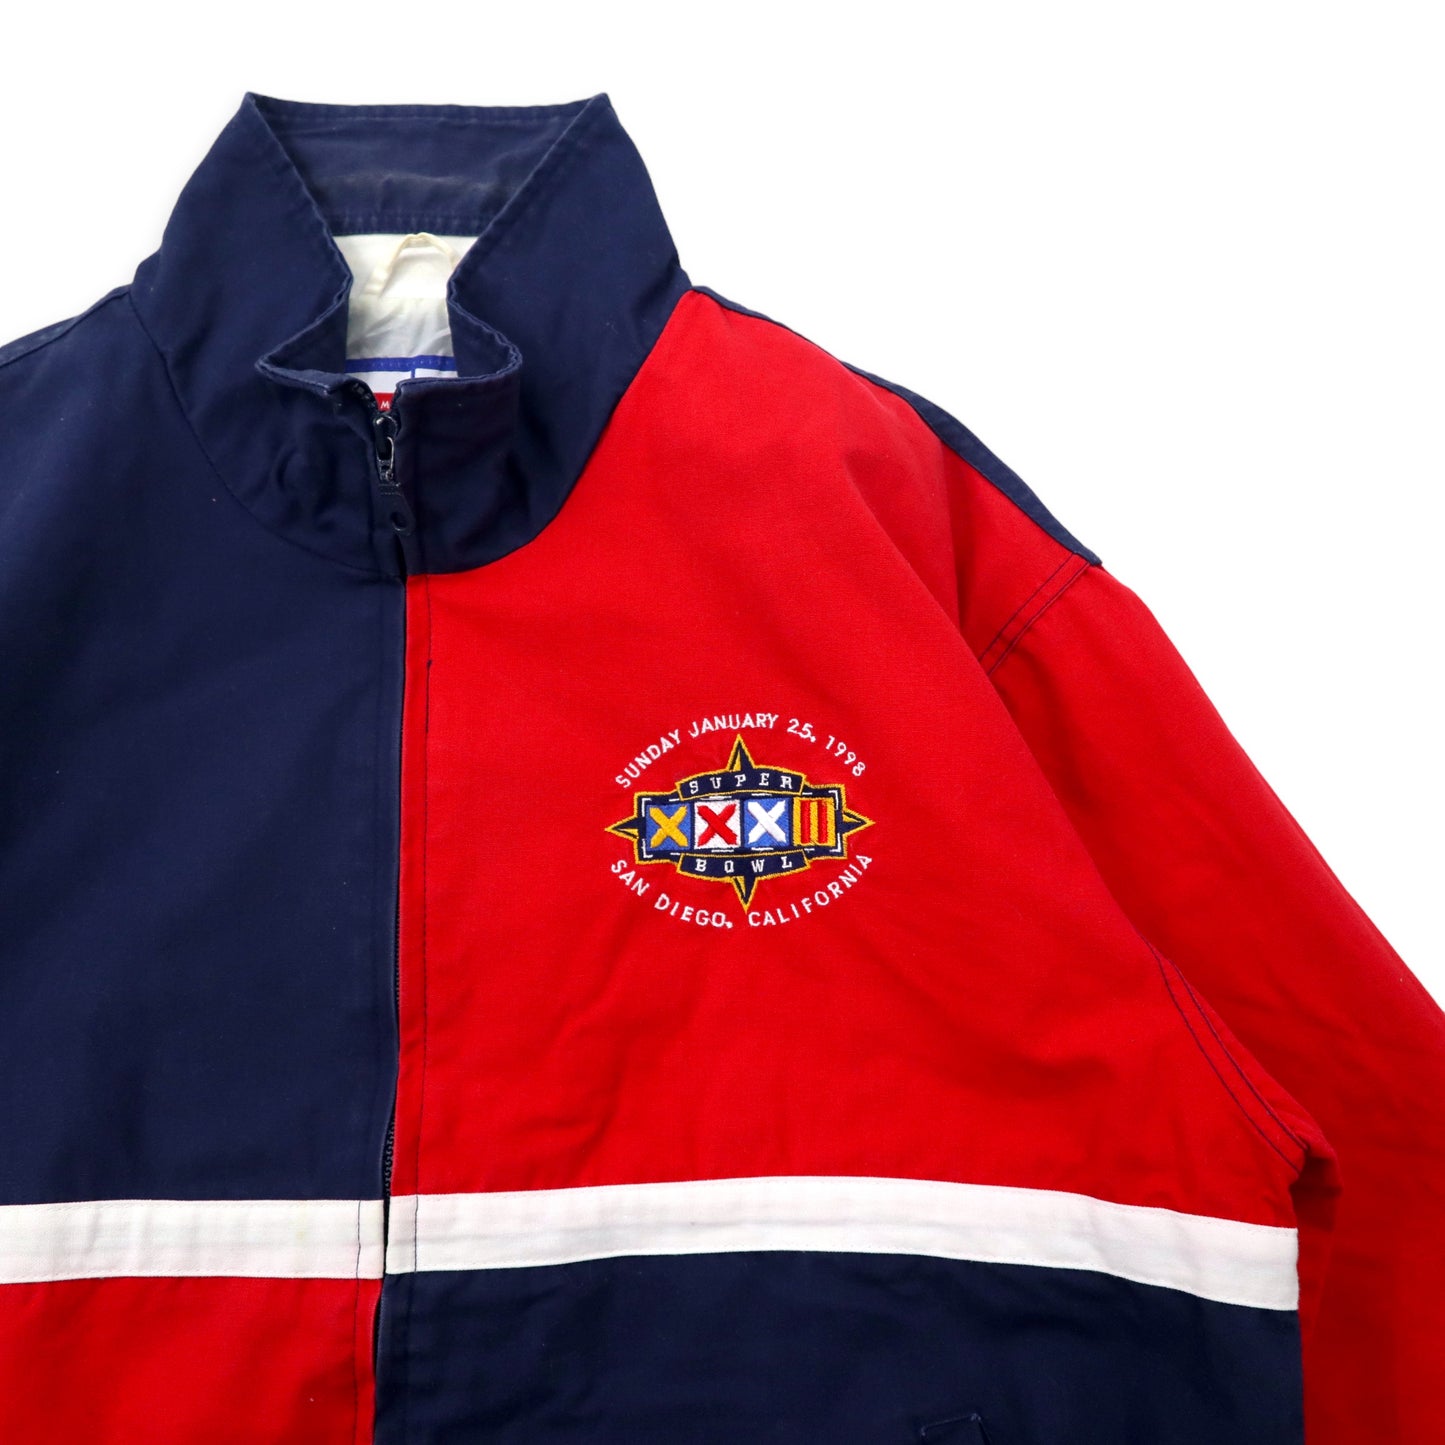 LOGO7 NFL 90's Swing Top Sports Jacket XL Navy Red Cotton